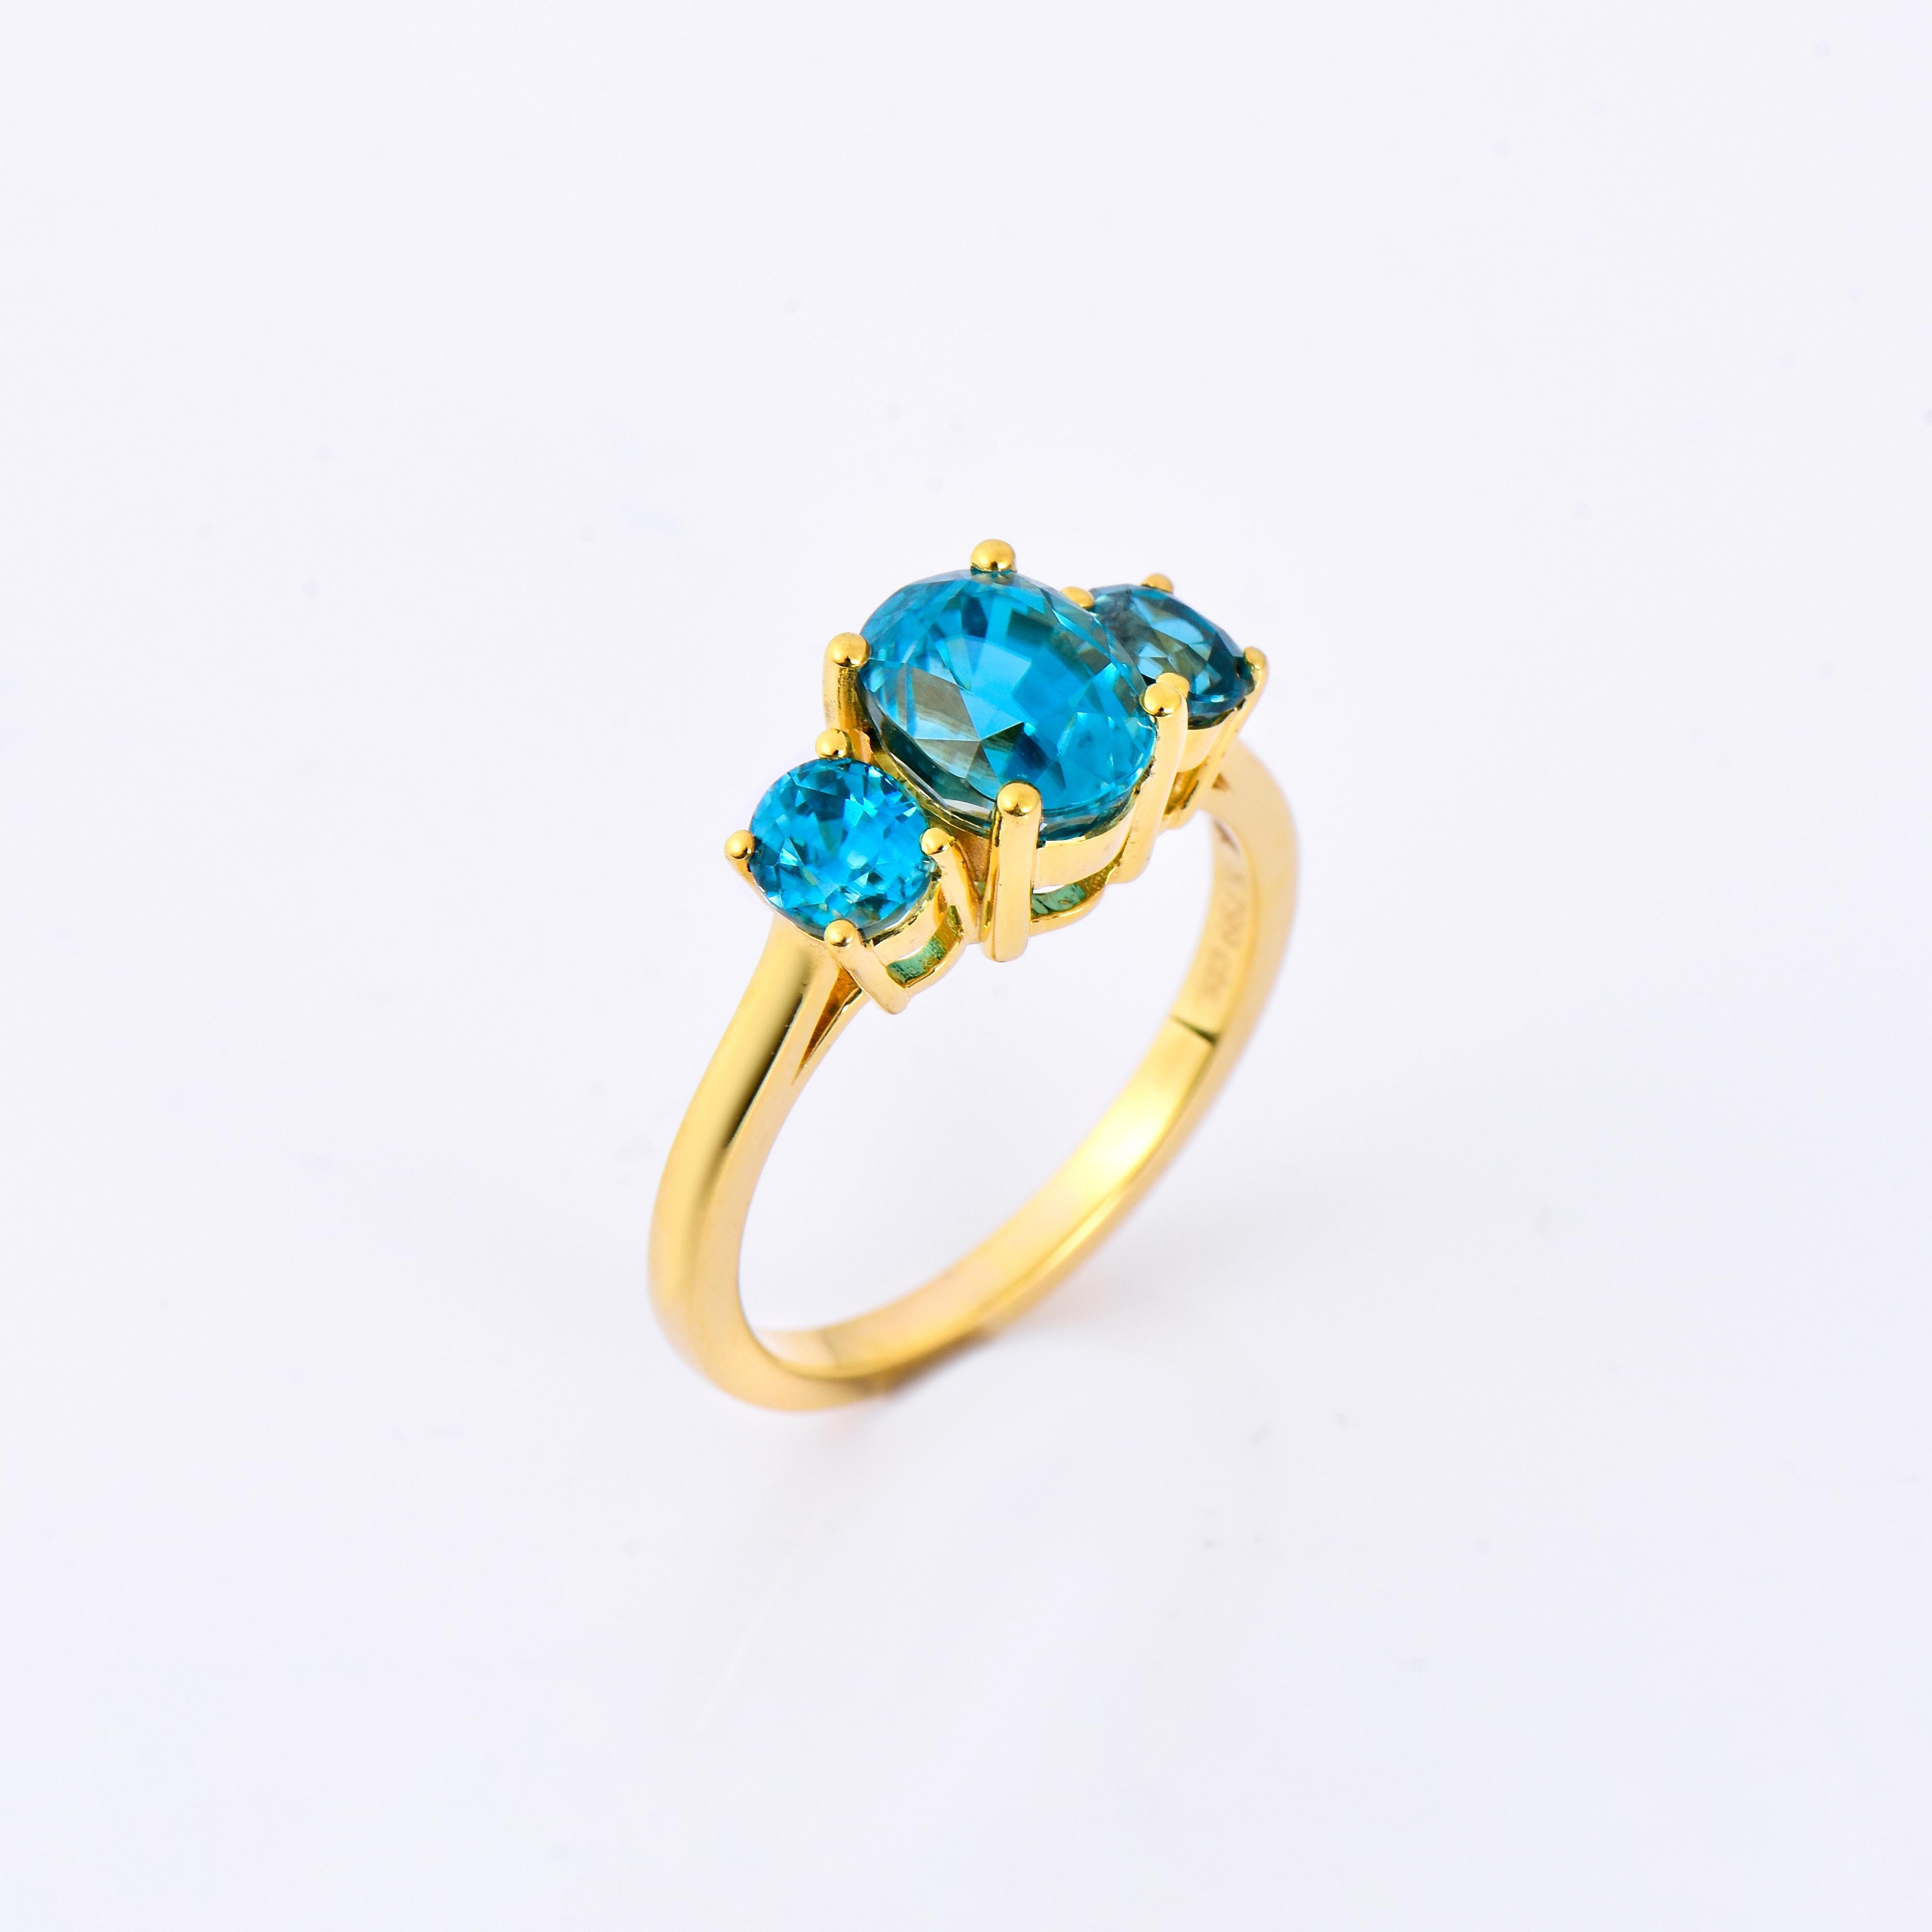 Orloff of Denmark; 10 Karat Gold Ring set with three Natural Cambodian Blue Zircons totaling to 5.8 carats.

This exquisite ring is a testament to timeless elegance, featuring a trio of mesmerizing Cambodian blue zircons set in lustrous 10 Karat